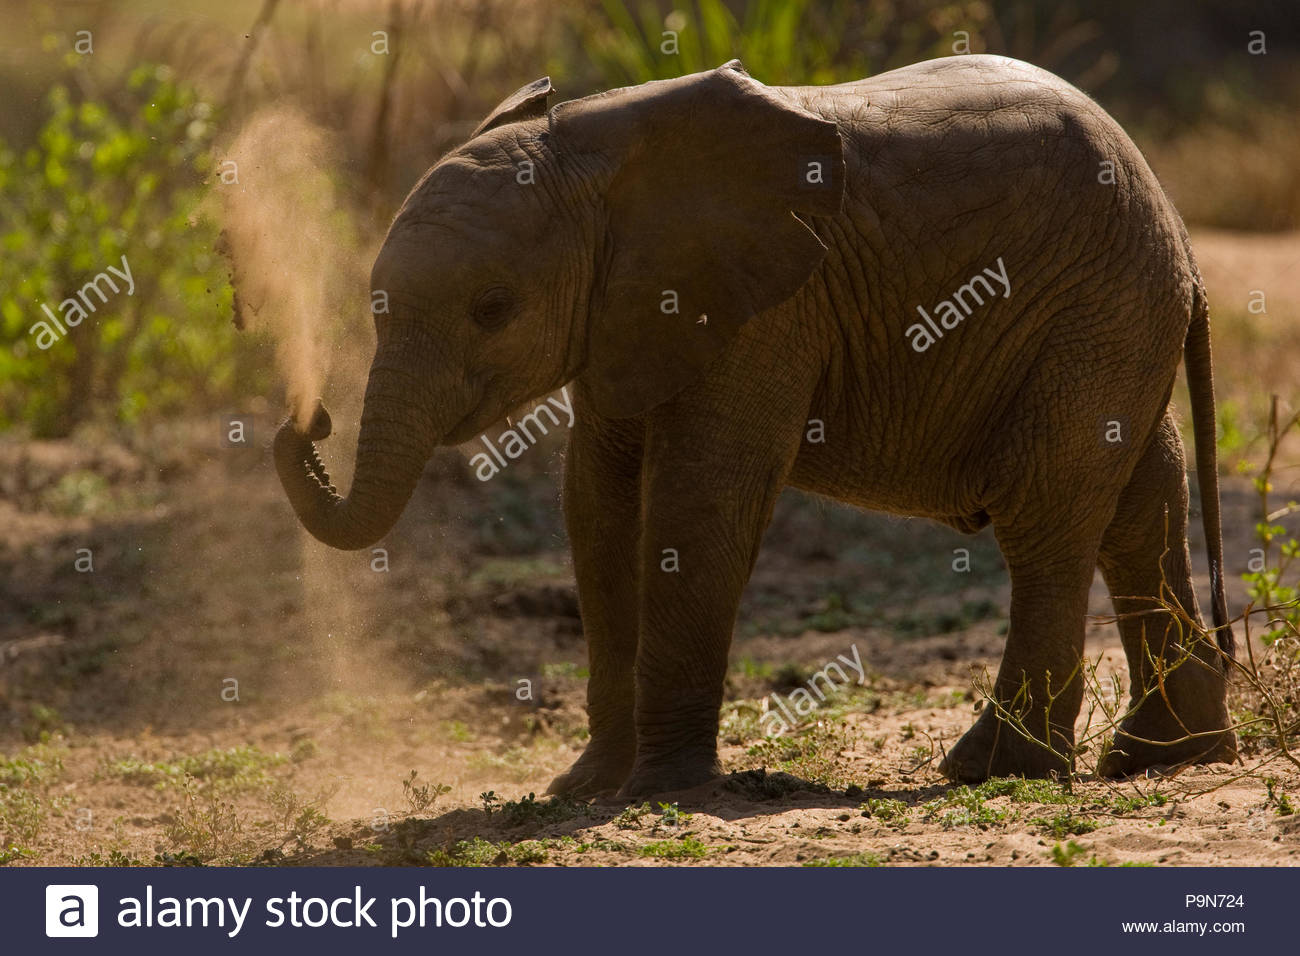 A baby African elephant, Loxodonta africana, tossing dirt. Stock Photo